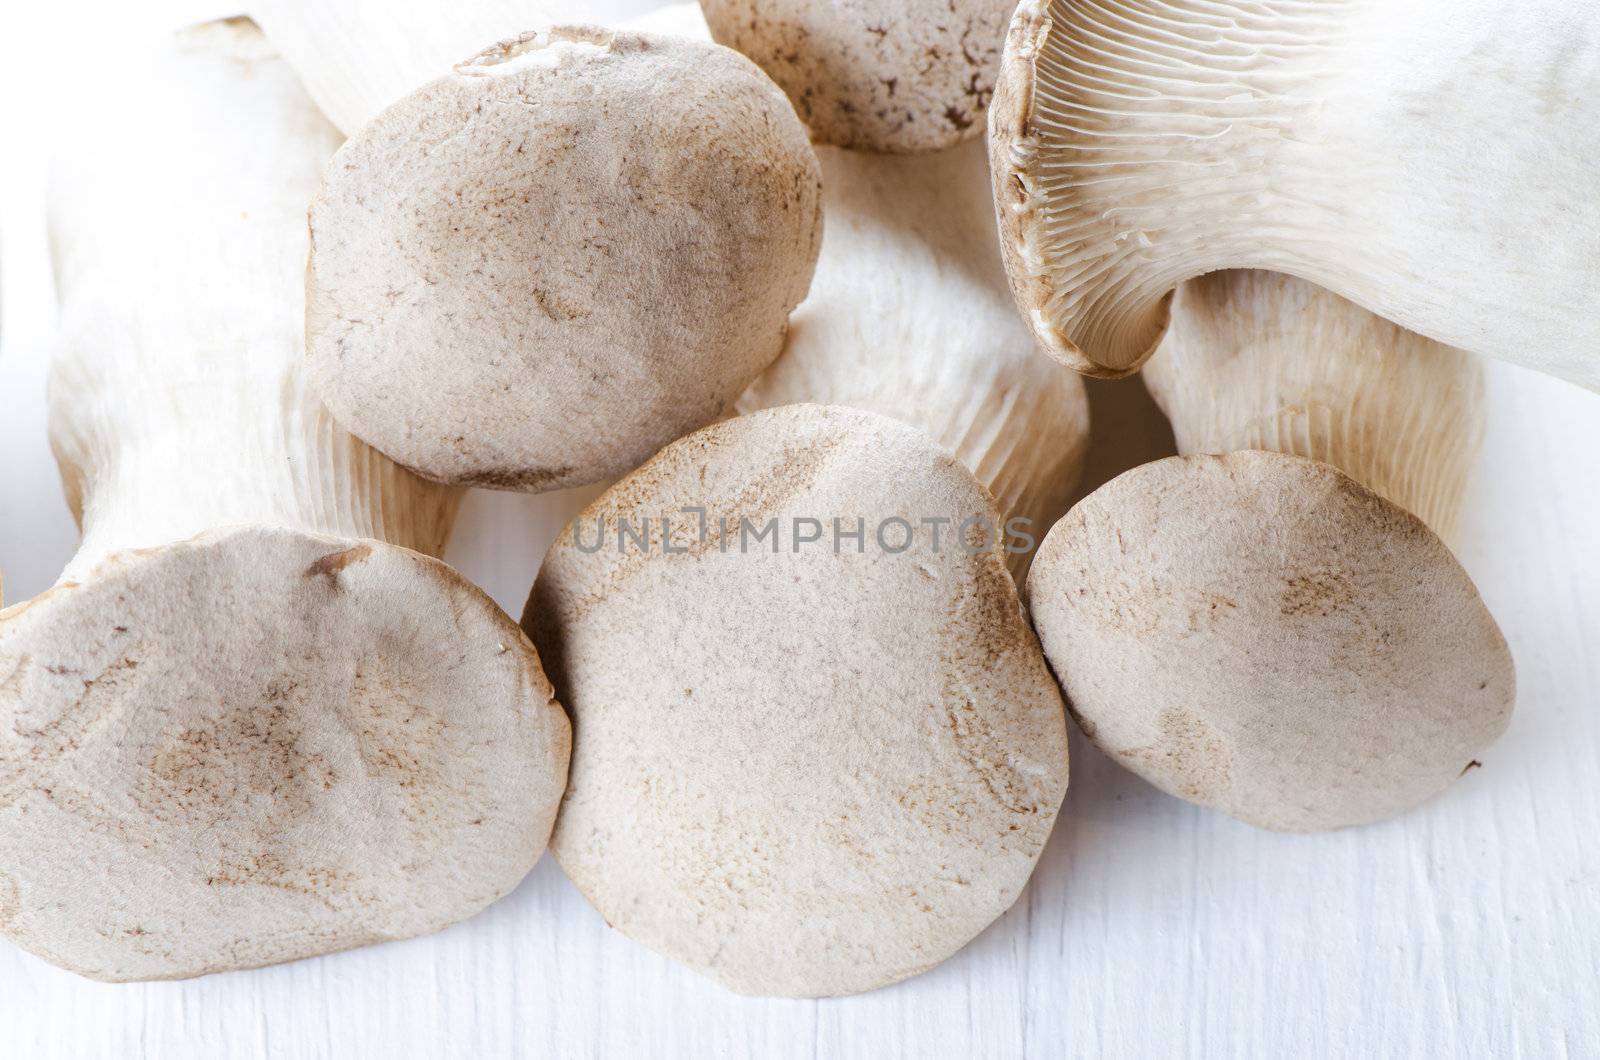 King oyster mushrooms on a white wooden table